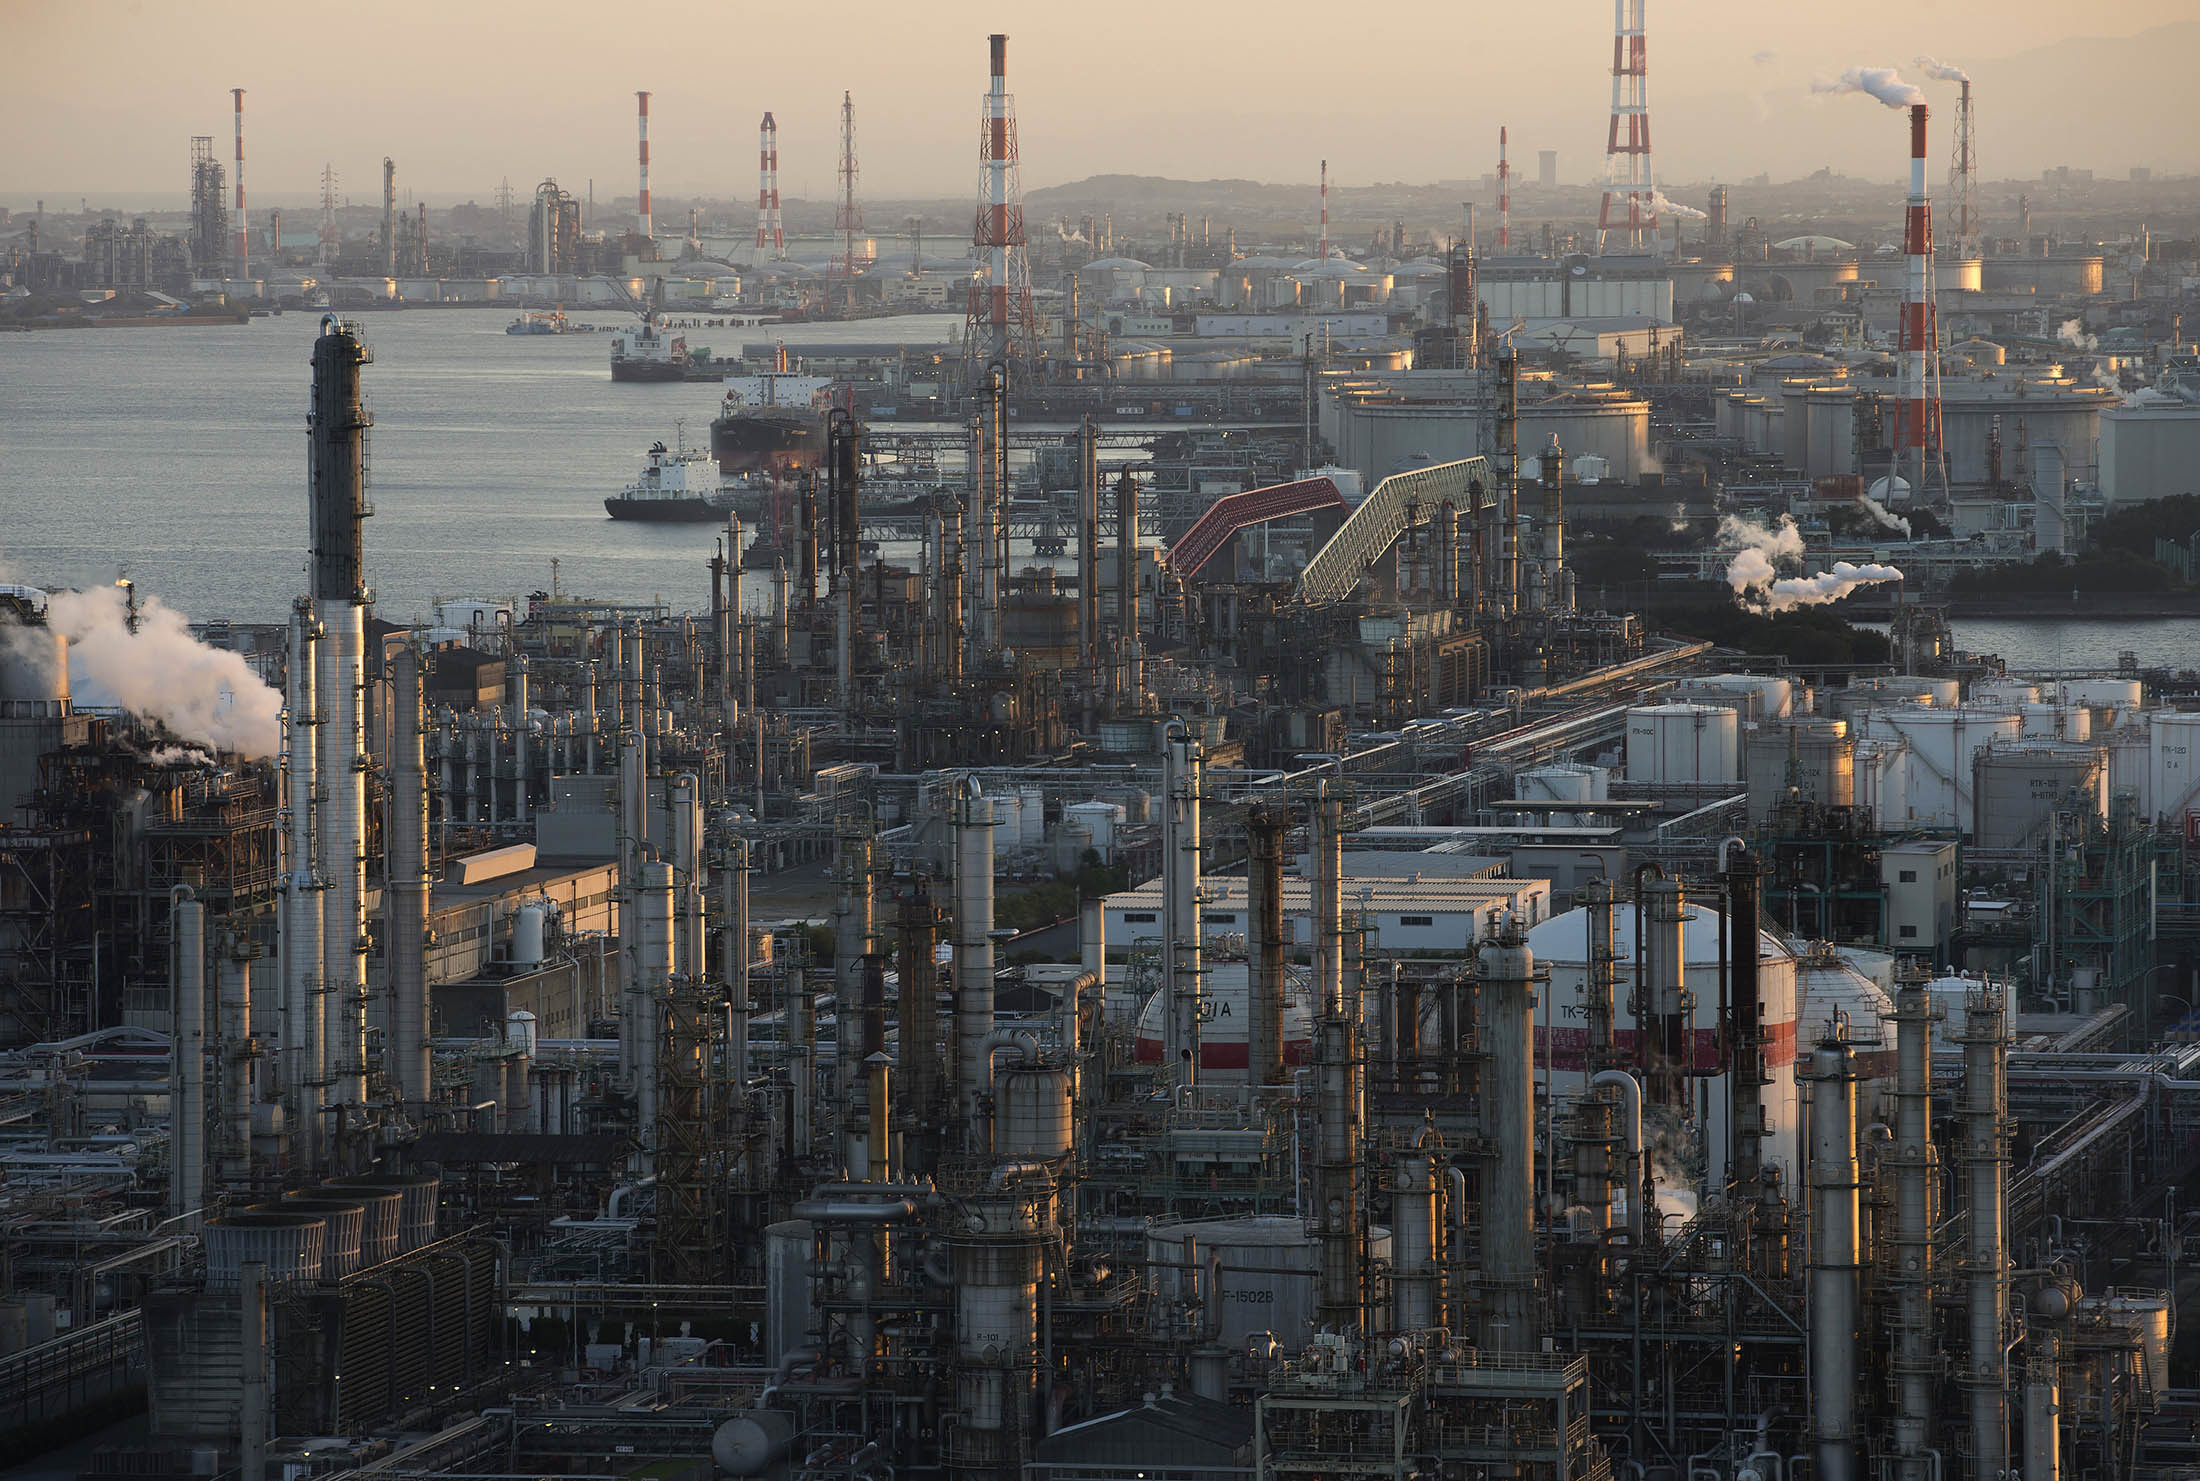 Chemical plants and oil refineries stand at the Yokkaichi industrial complex at dusk in Yokkaichi, Mie Prefecture, Japan, on Friday, Oct. 27, 2016. The Paris Agreement, the most sweeping climate change agreement to combat global warming to date, will enter into force Nov. 4. Photographer: Tomohiro Ohsumi/Bloomberg